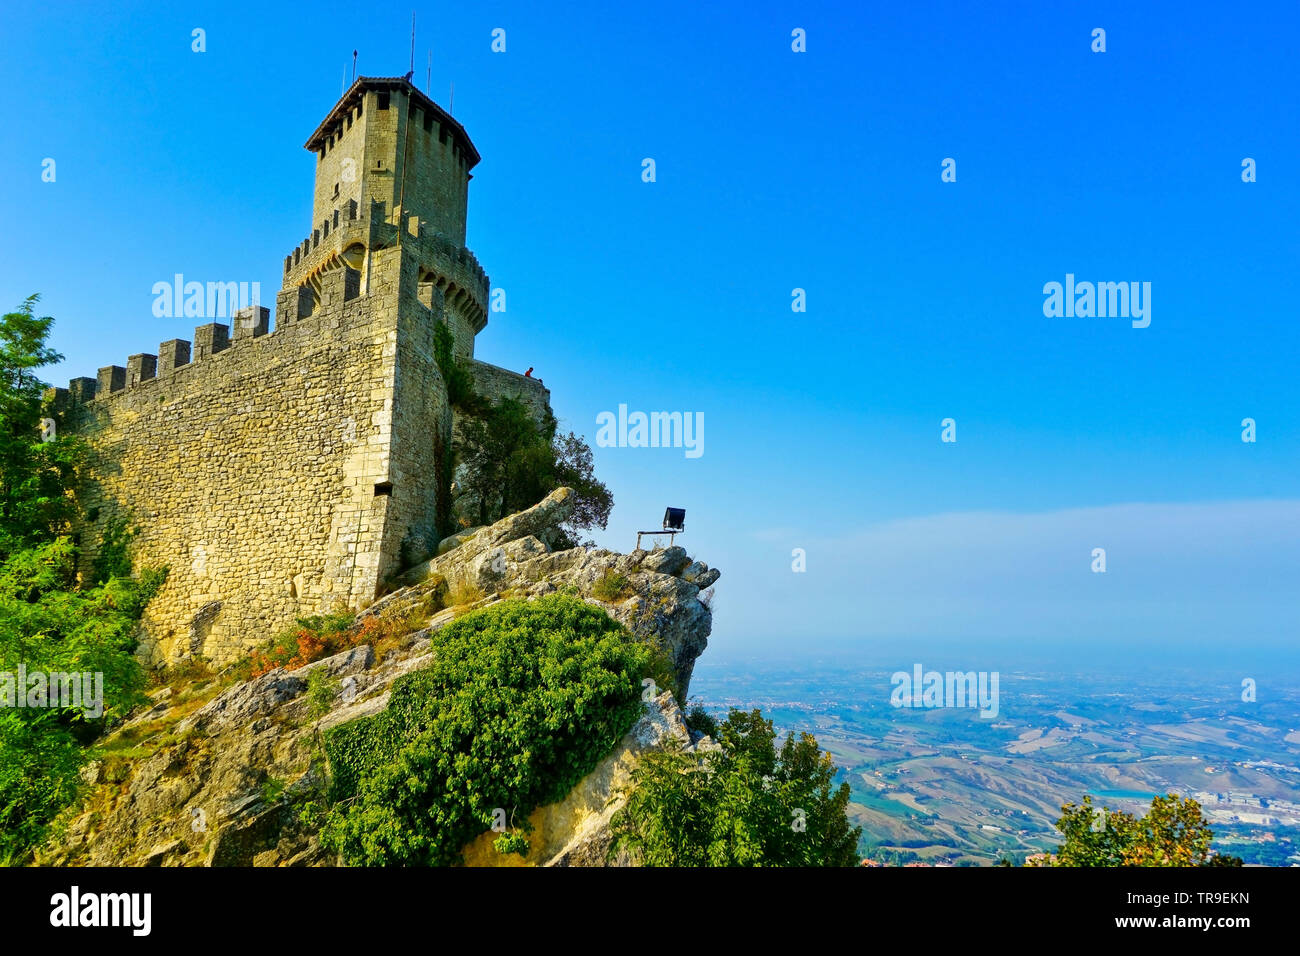 View of the Guaita fortress located on the peak of Monte Titano in San ...